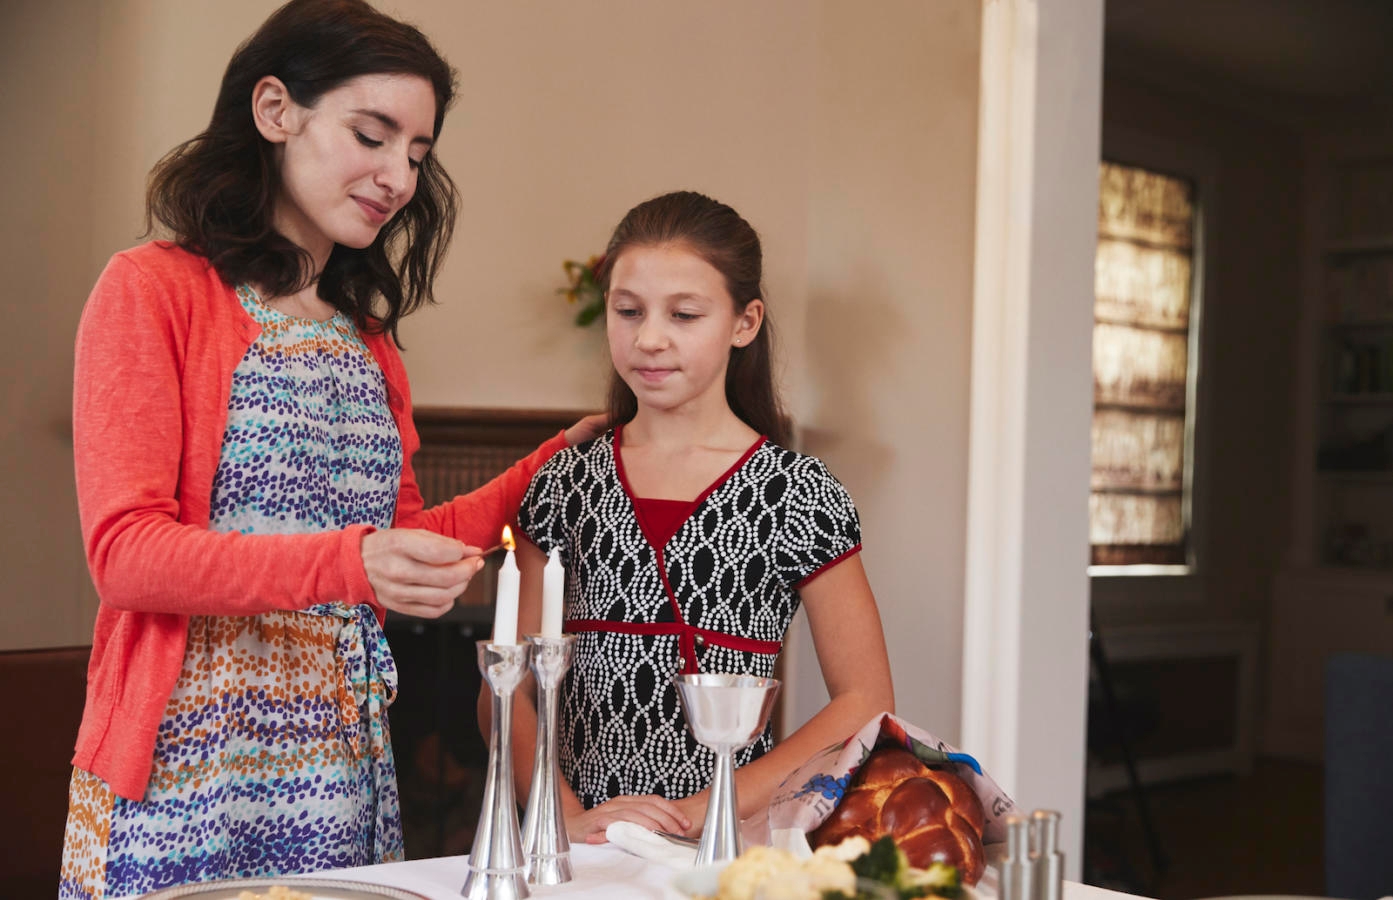 Jewish mother and daughter lighting candles for Shabbat meal